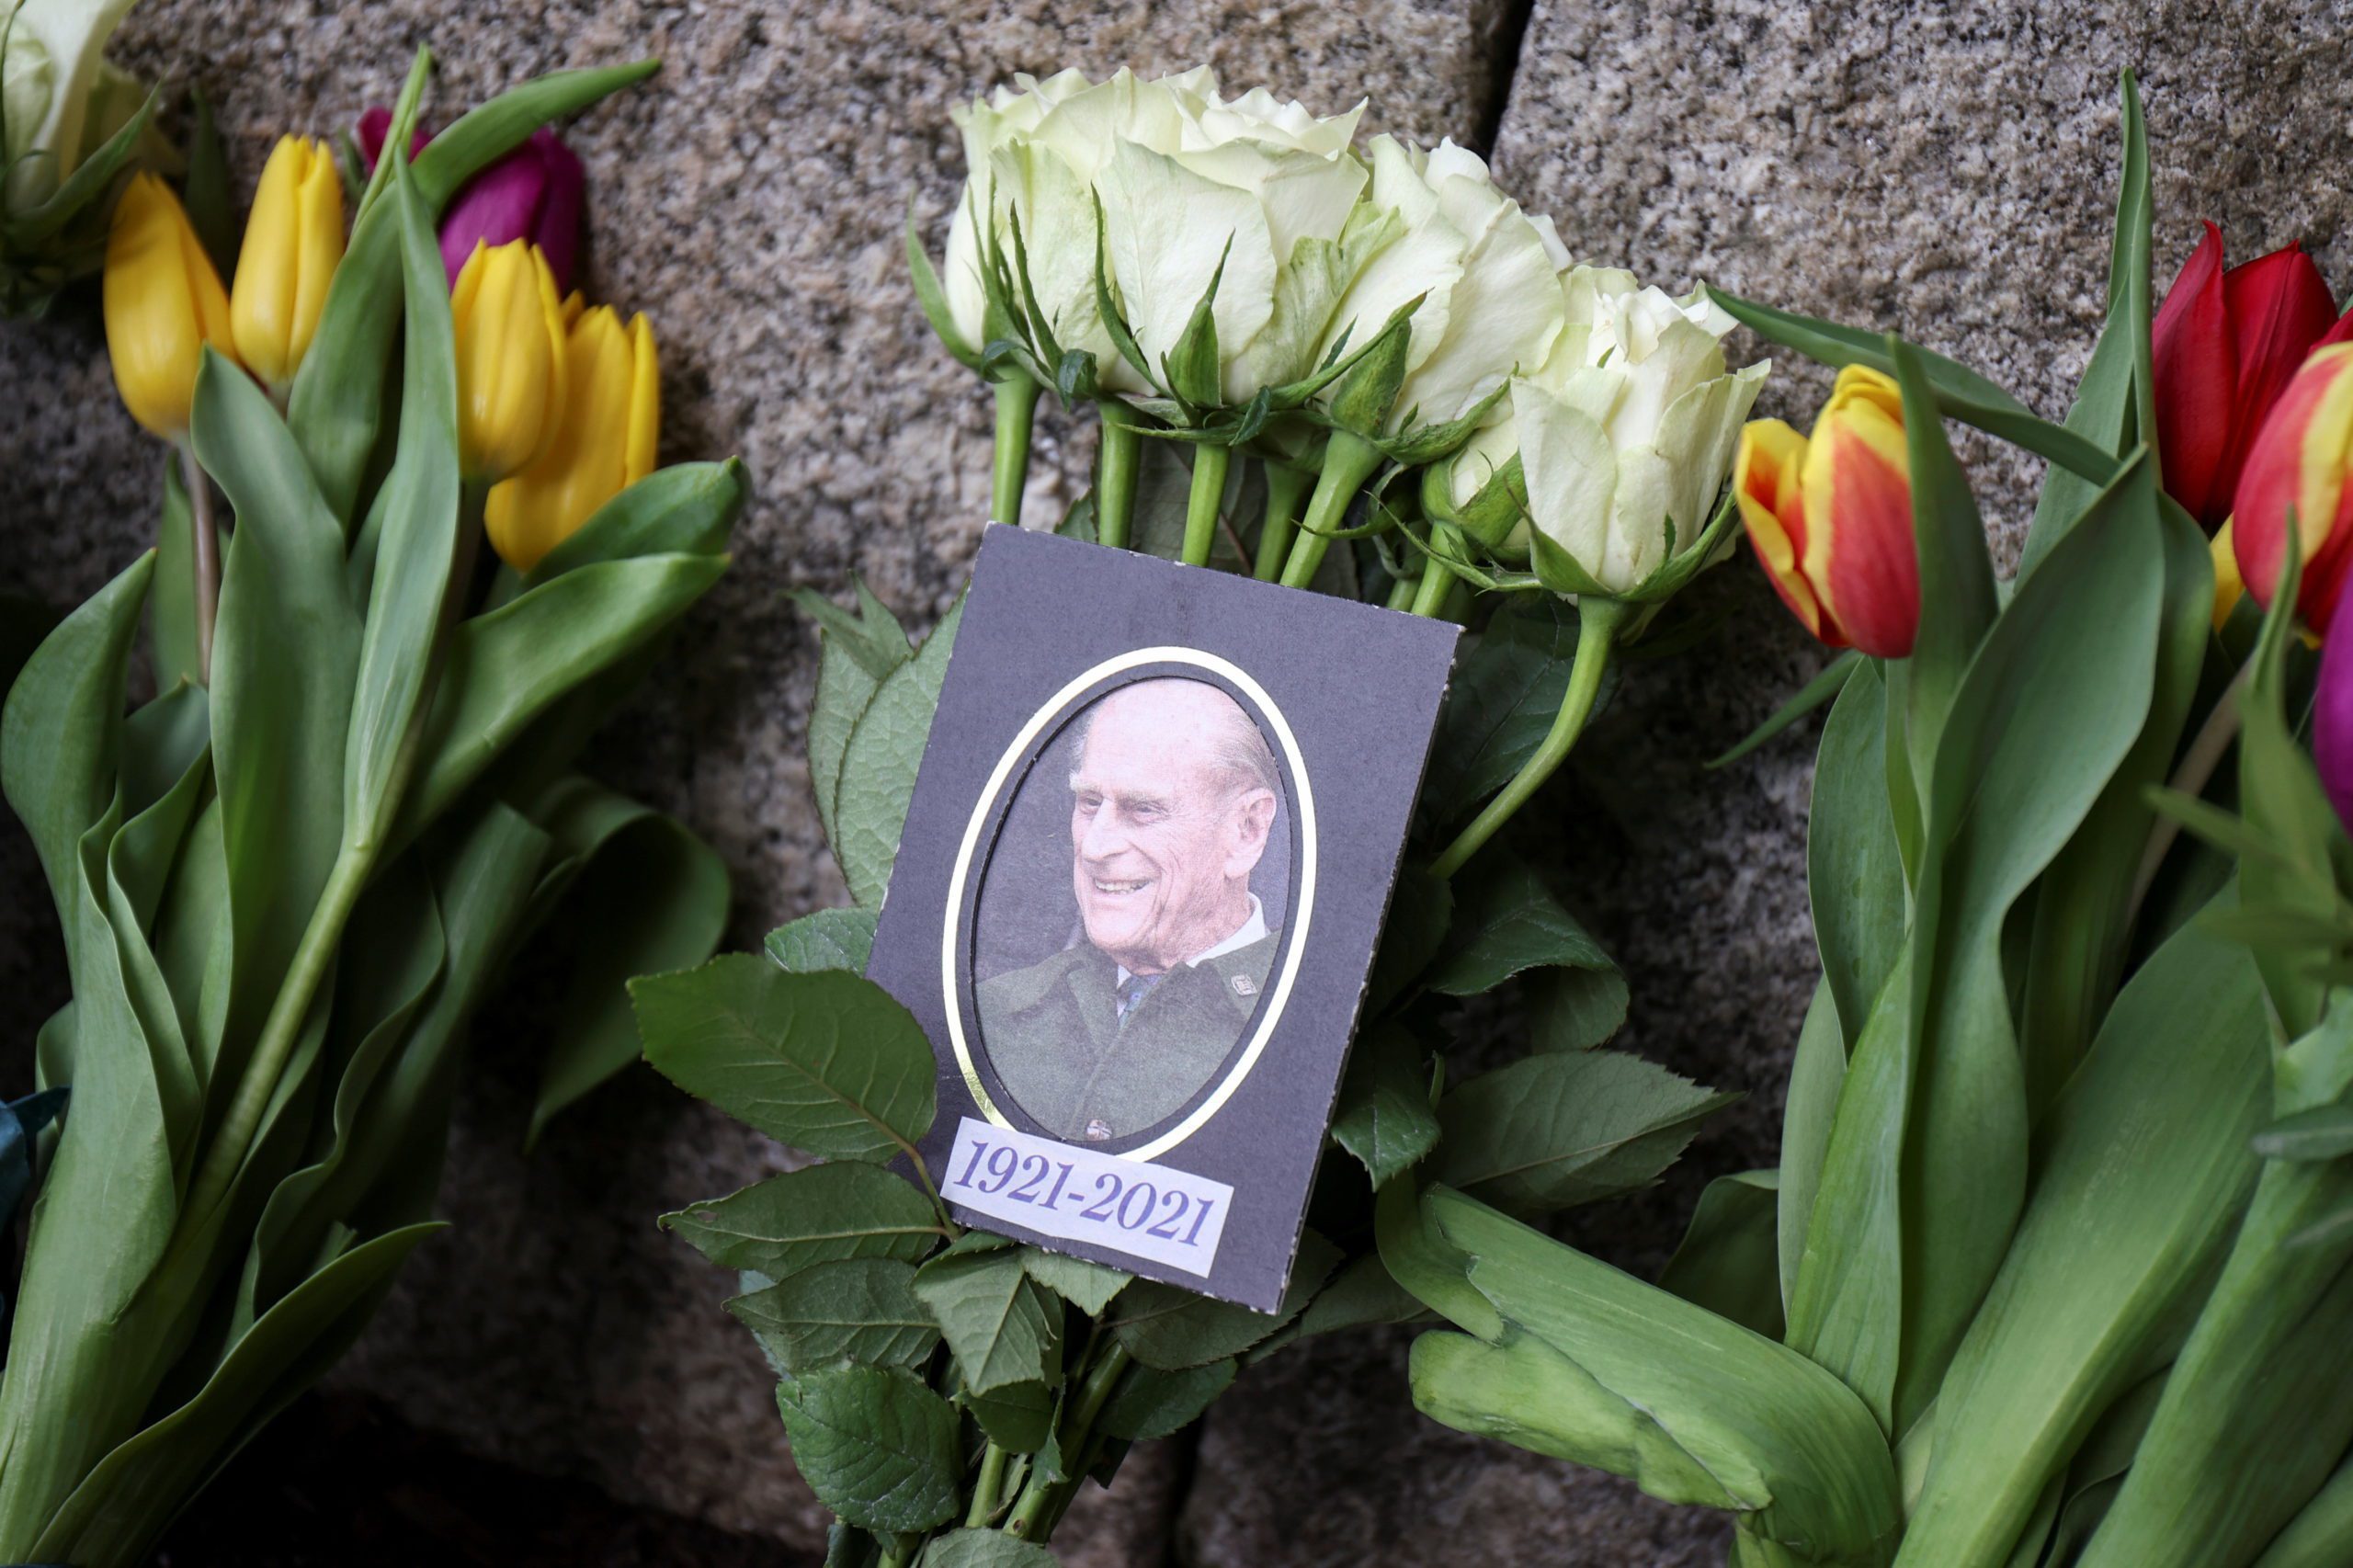 A picture of Britain's Prince Philip, husband of Queen Elizabeth, who died at the age of 99, is seen among the flowers outside Windsor castle, in Windsor, near London, Britain April 14, 2021. REUTERS/Molly Darlington